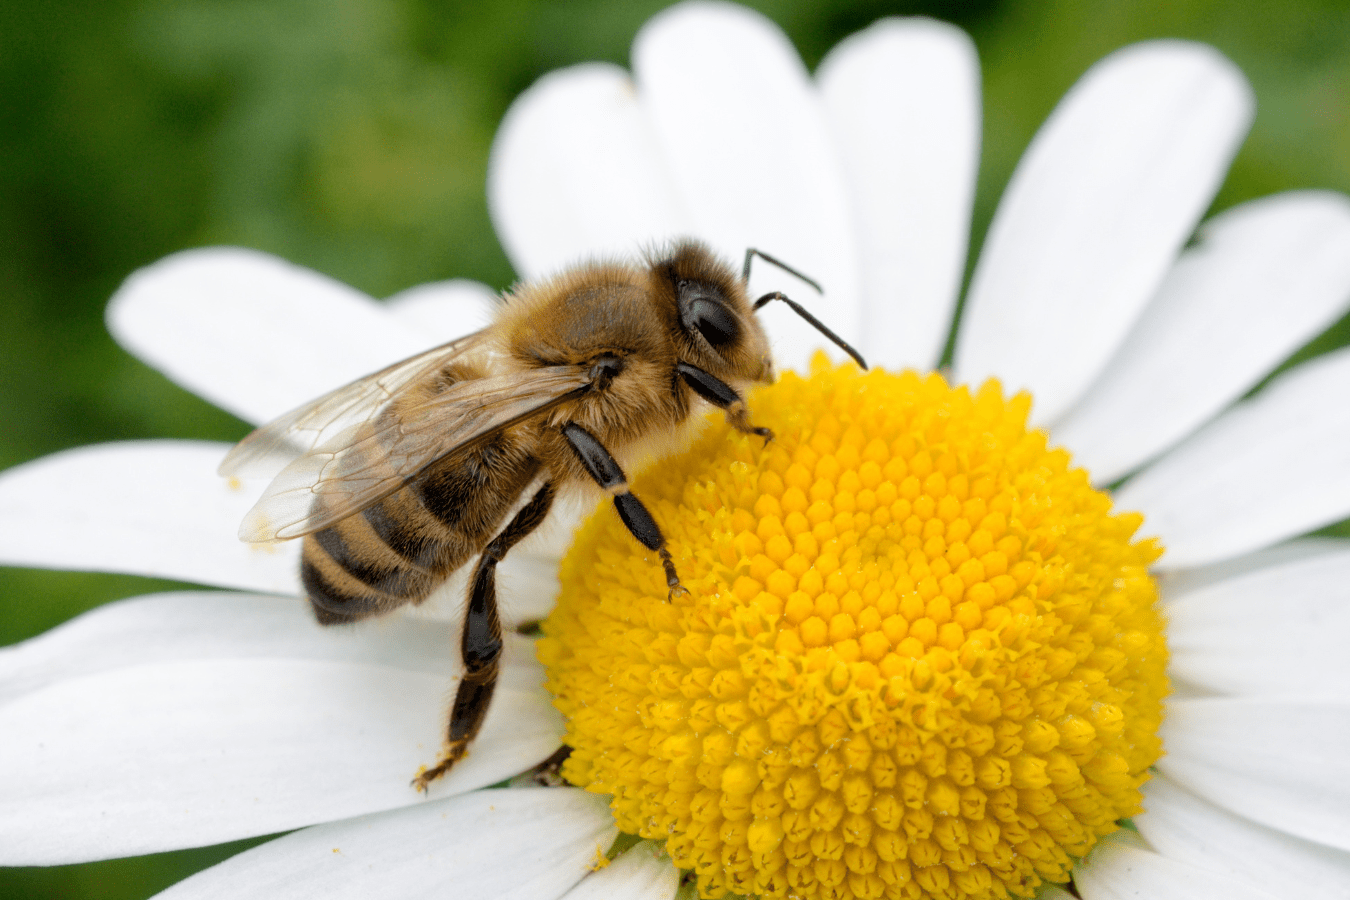 Dream About Bees: What Does it Mean?